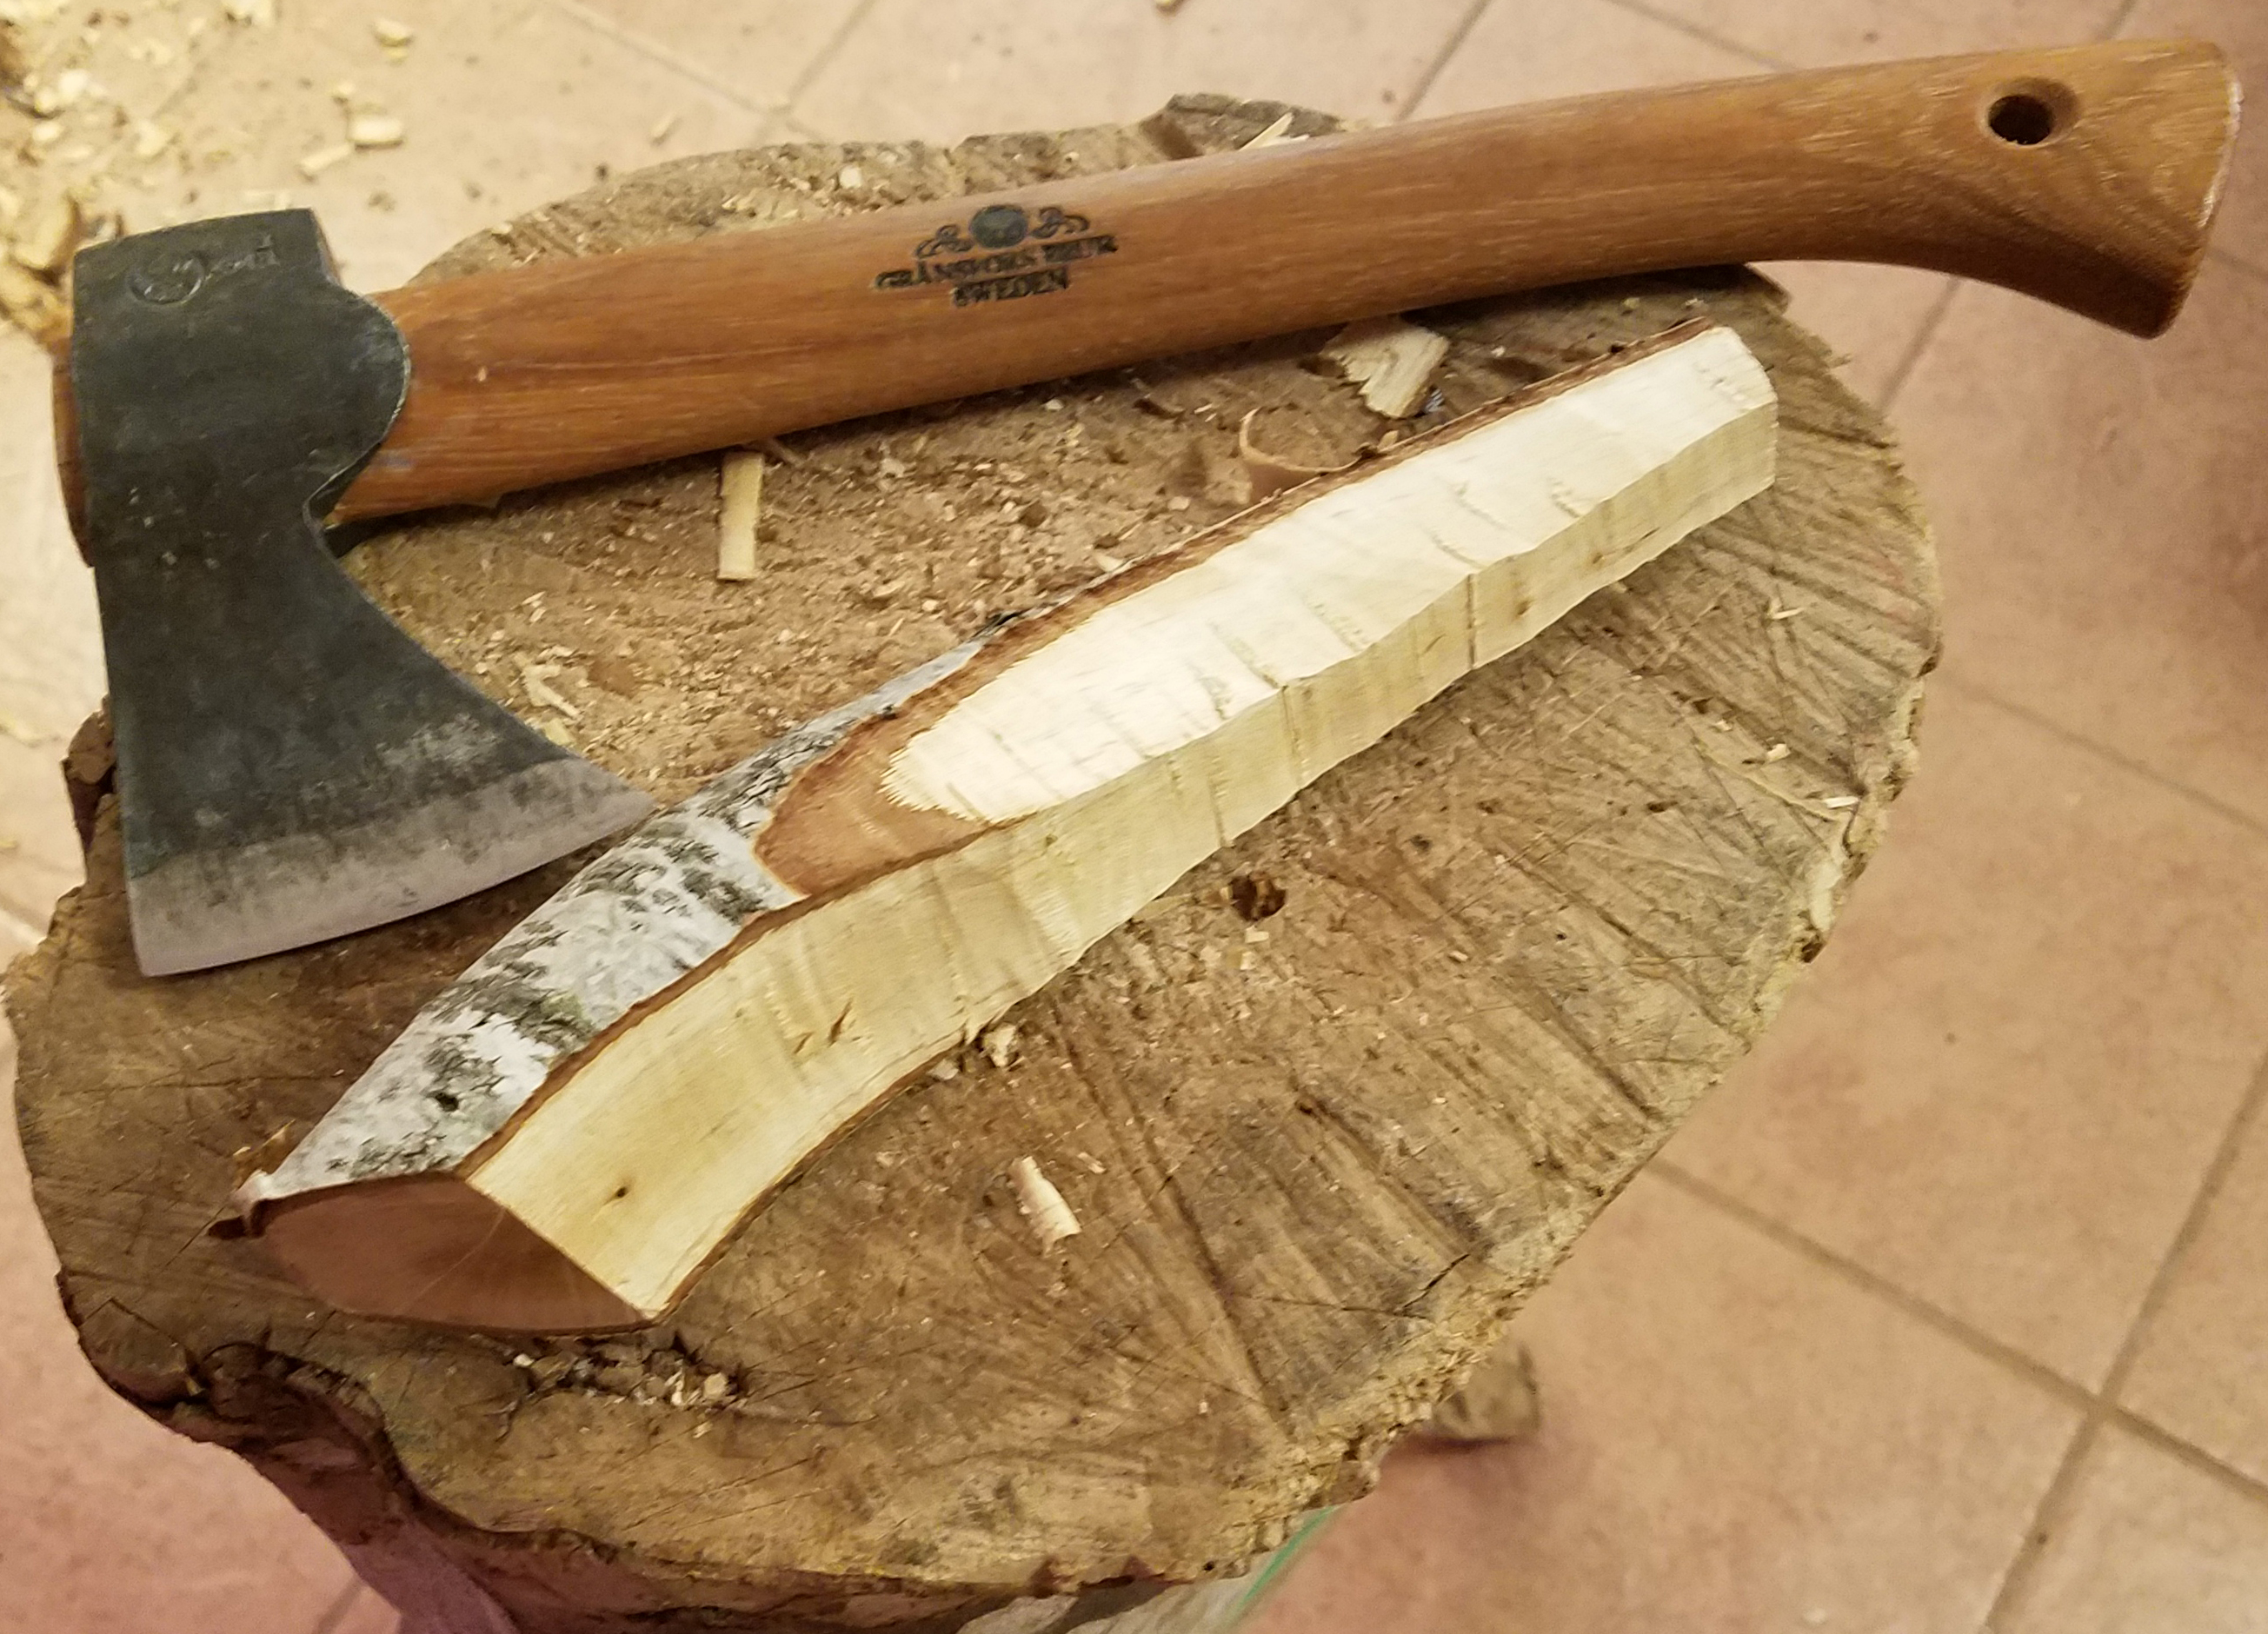 A birch-blank roughed out with an axe